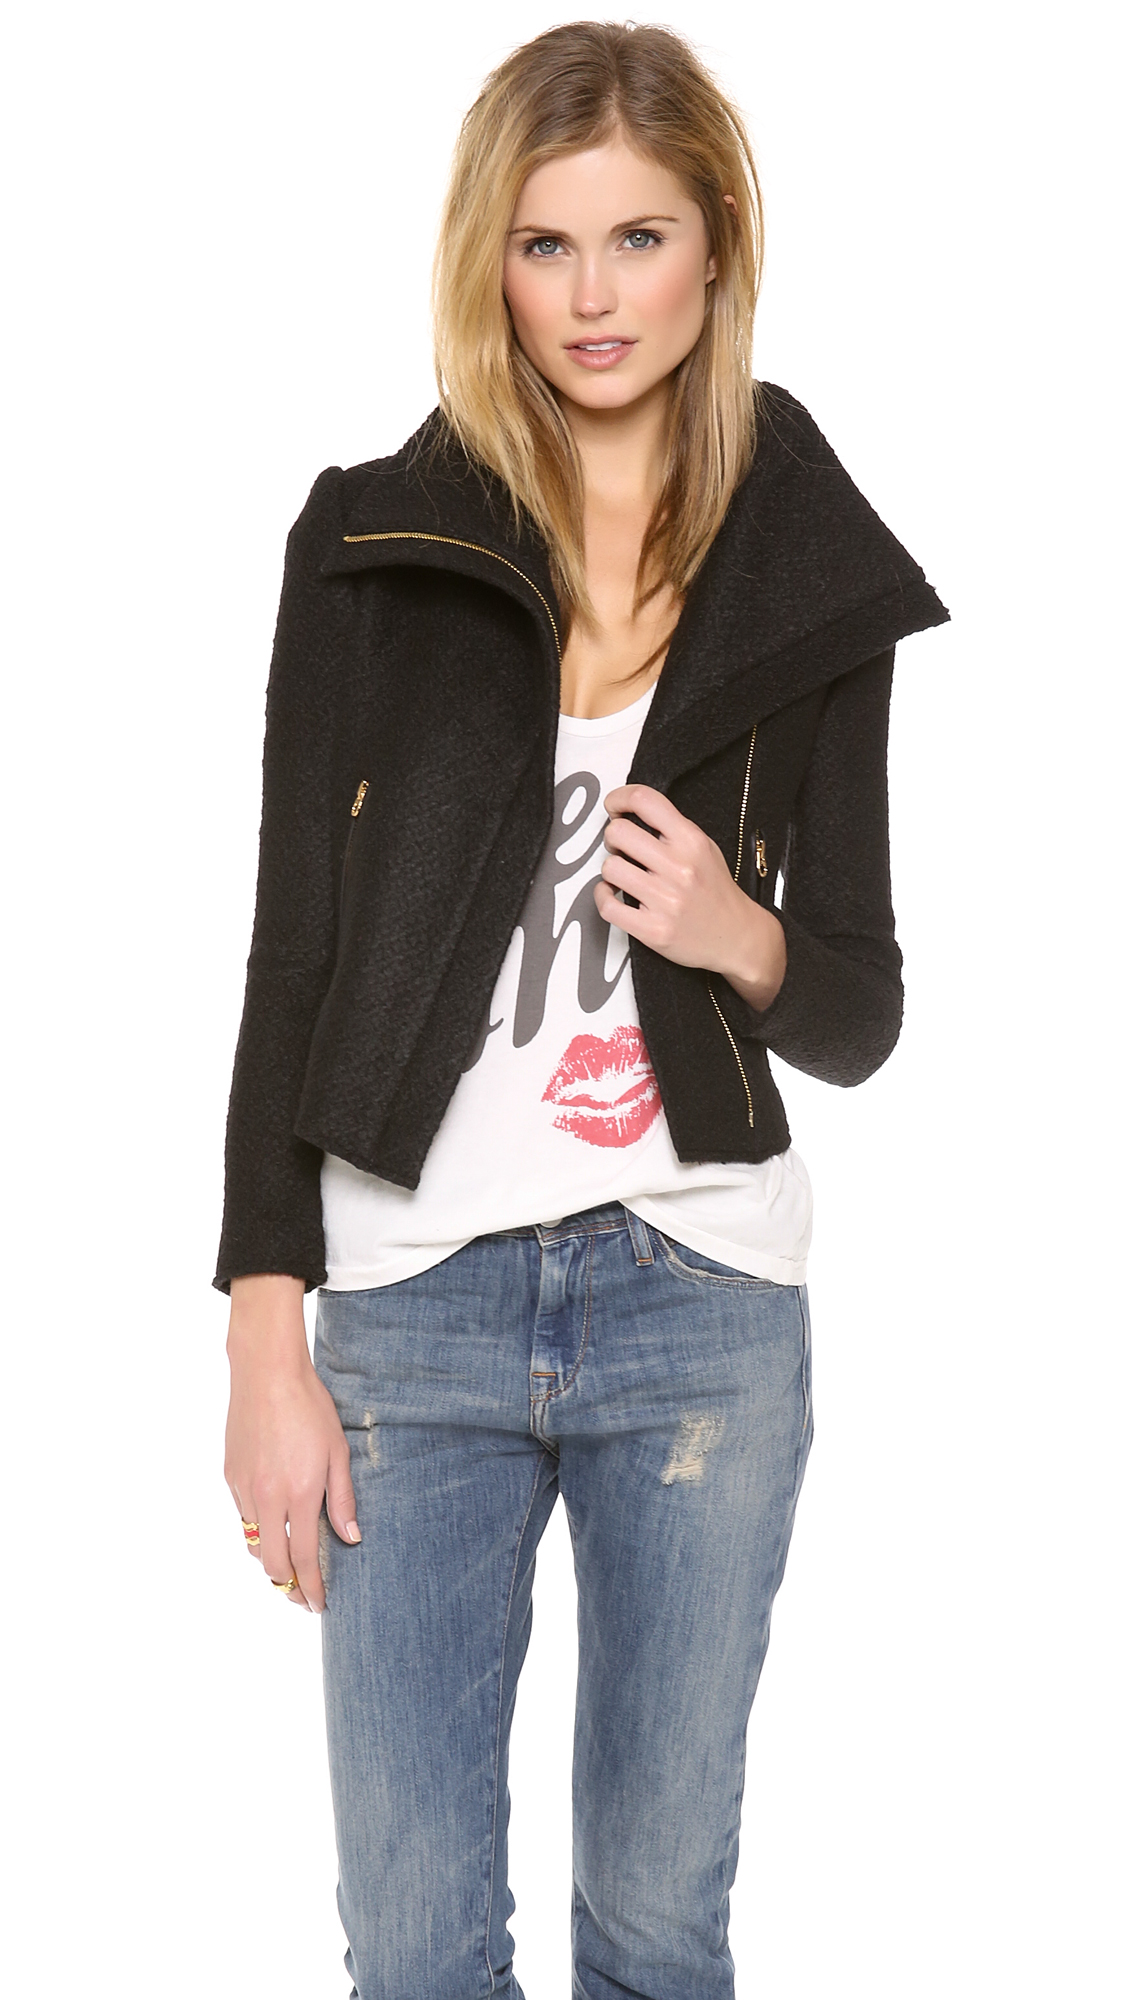 Lyst - Juicy couture Chunky Sweater Jacket in Black